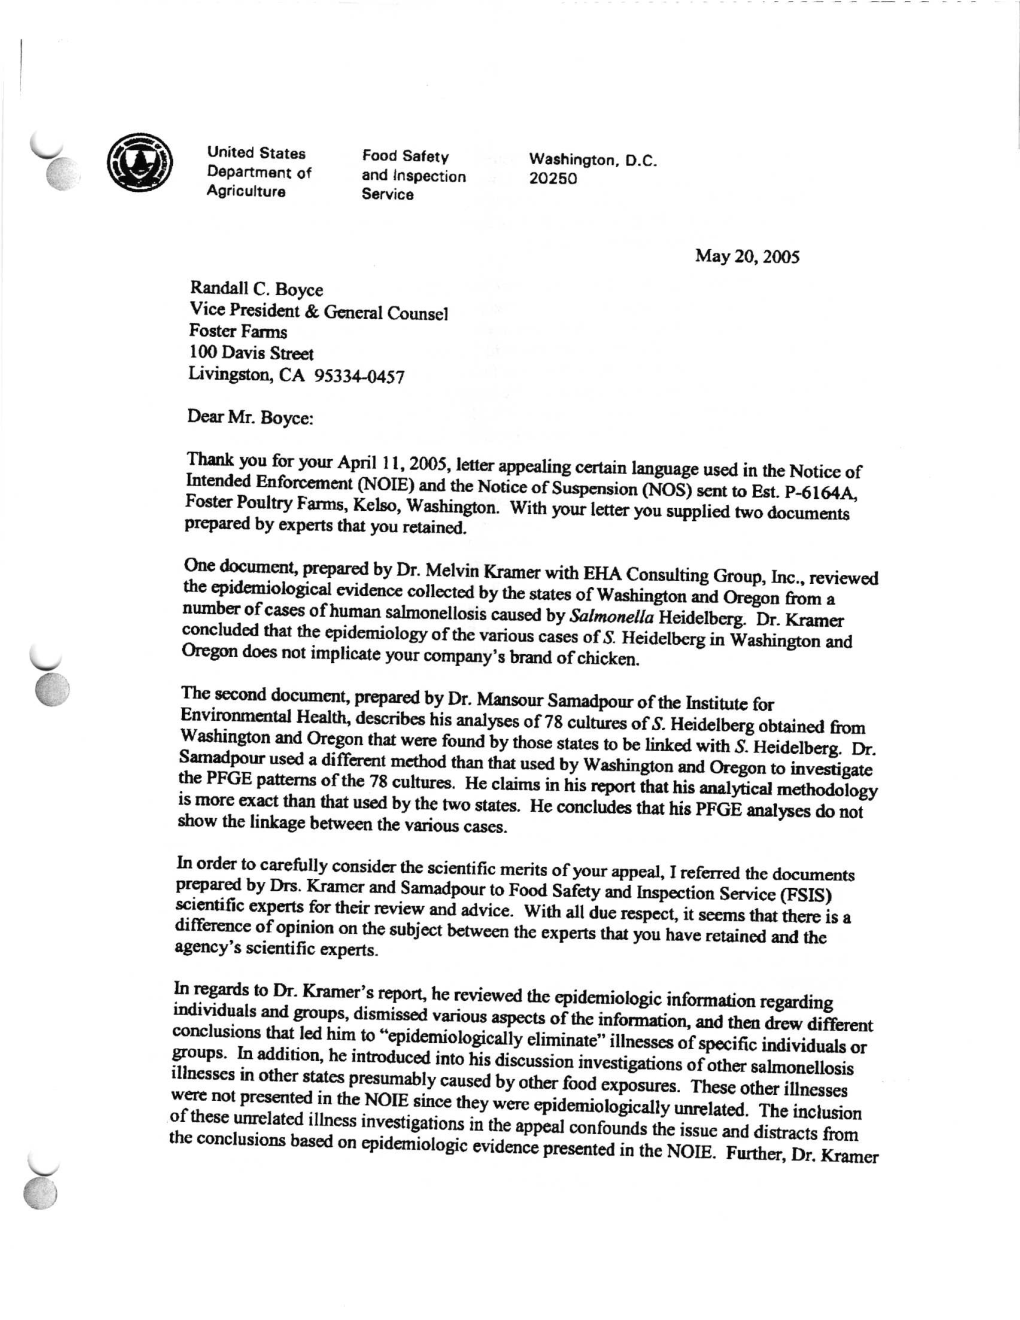 Letter from USDA to Foster Farms.Pdf